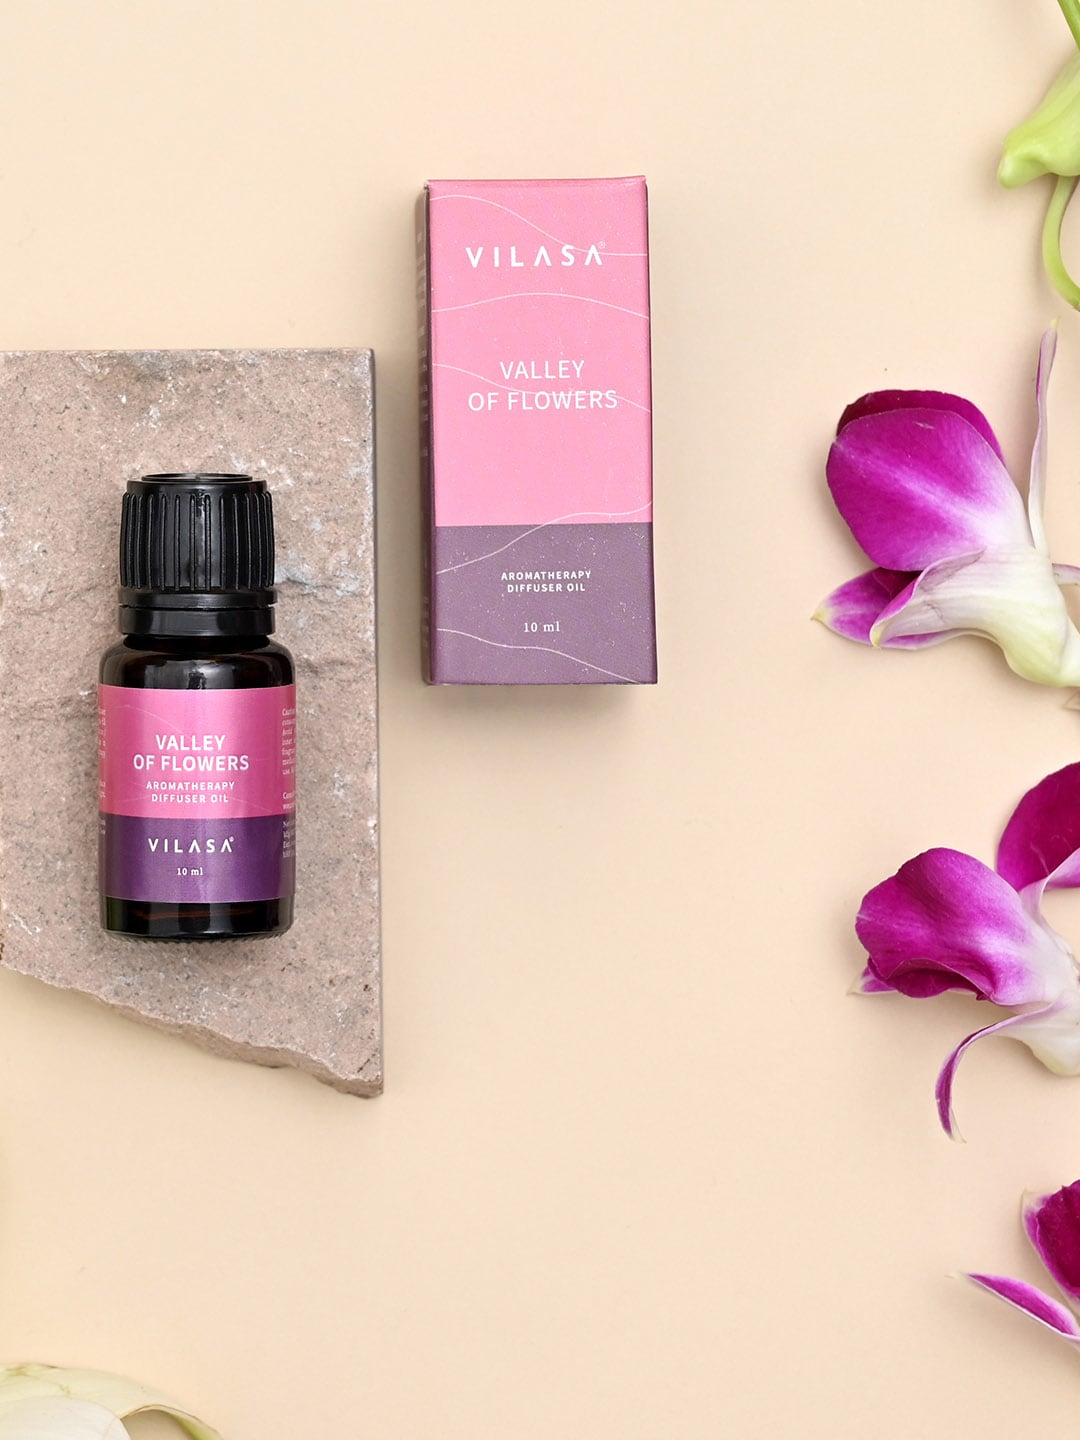 VILASA Valley Of Flowers Aromatherapy Diffuser Oil - 10 ml Price in India